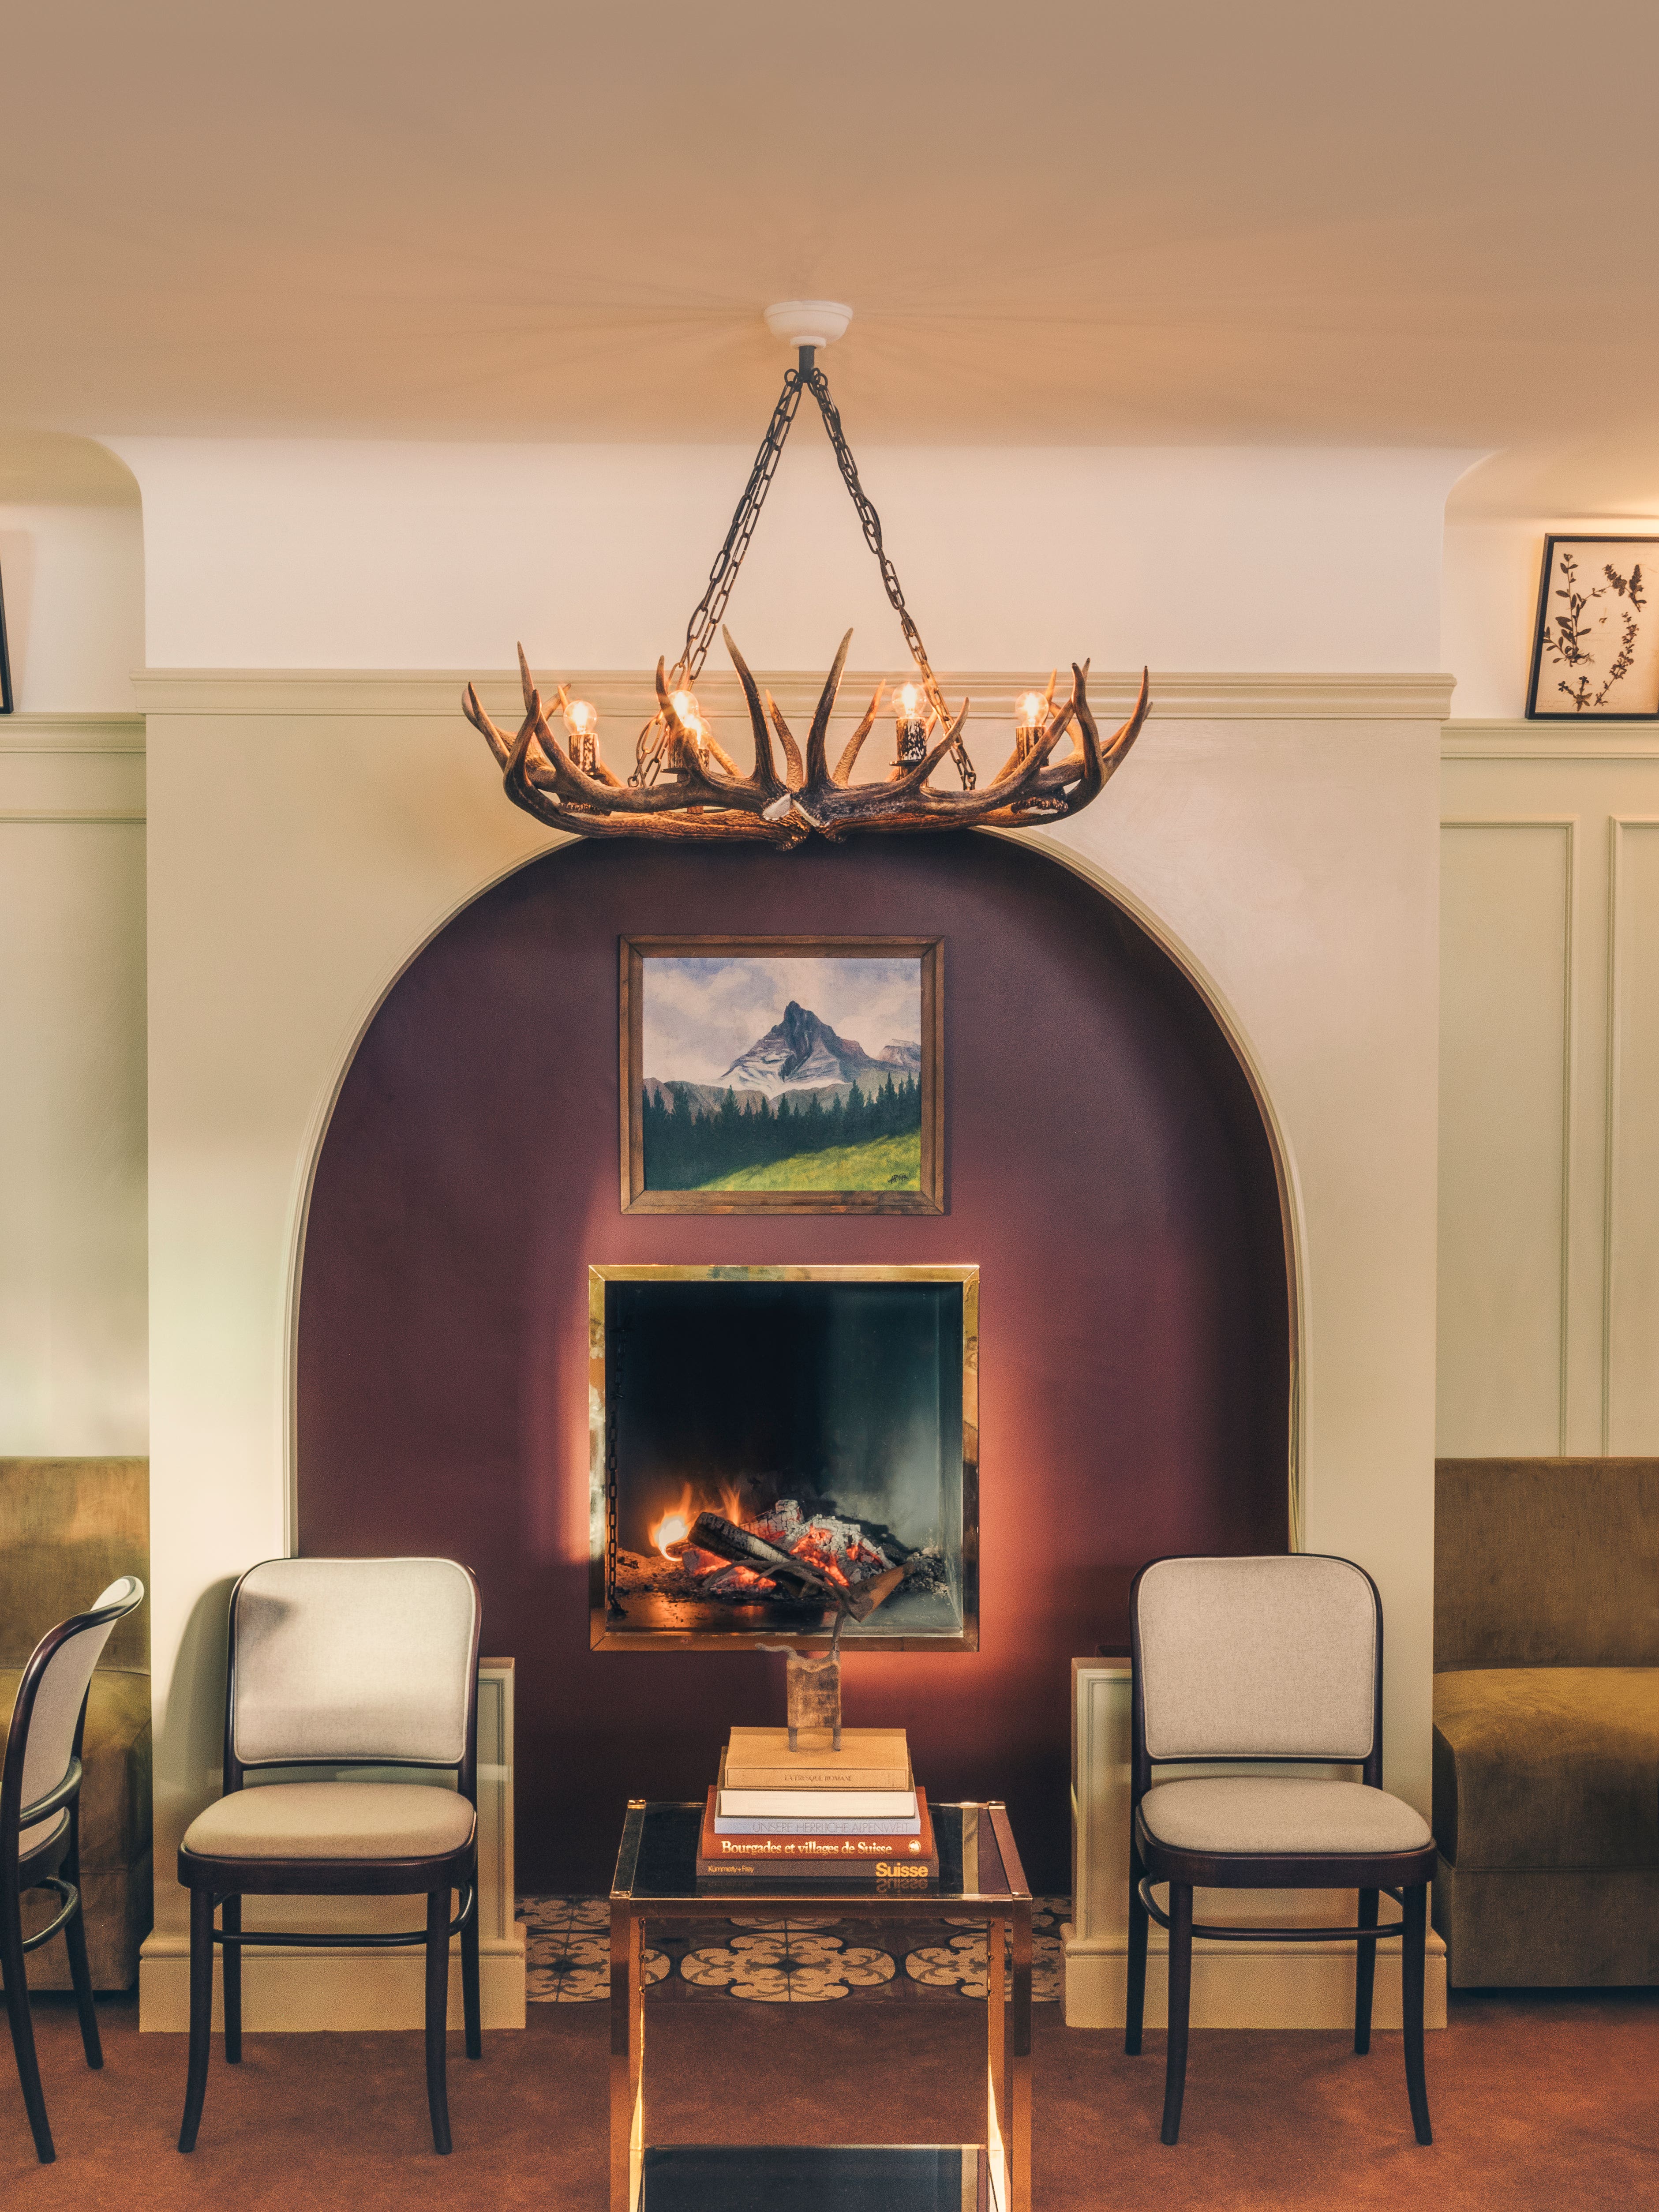 This Hip Swiss Chalet Has Us Dreaming of Apres-Ski in the Alps